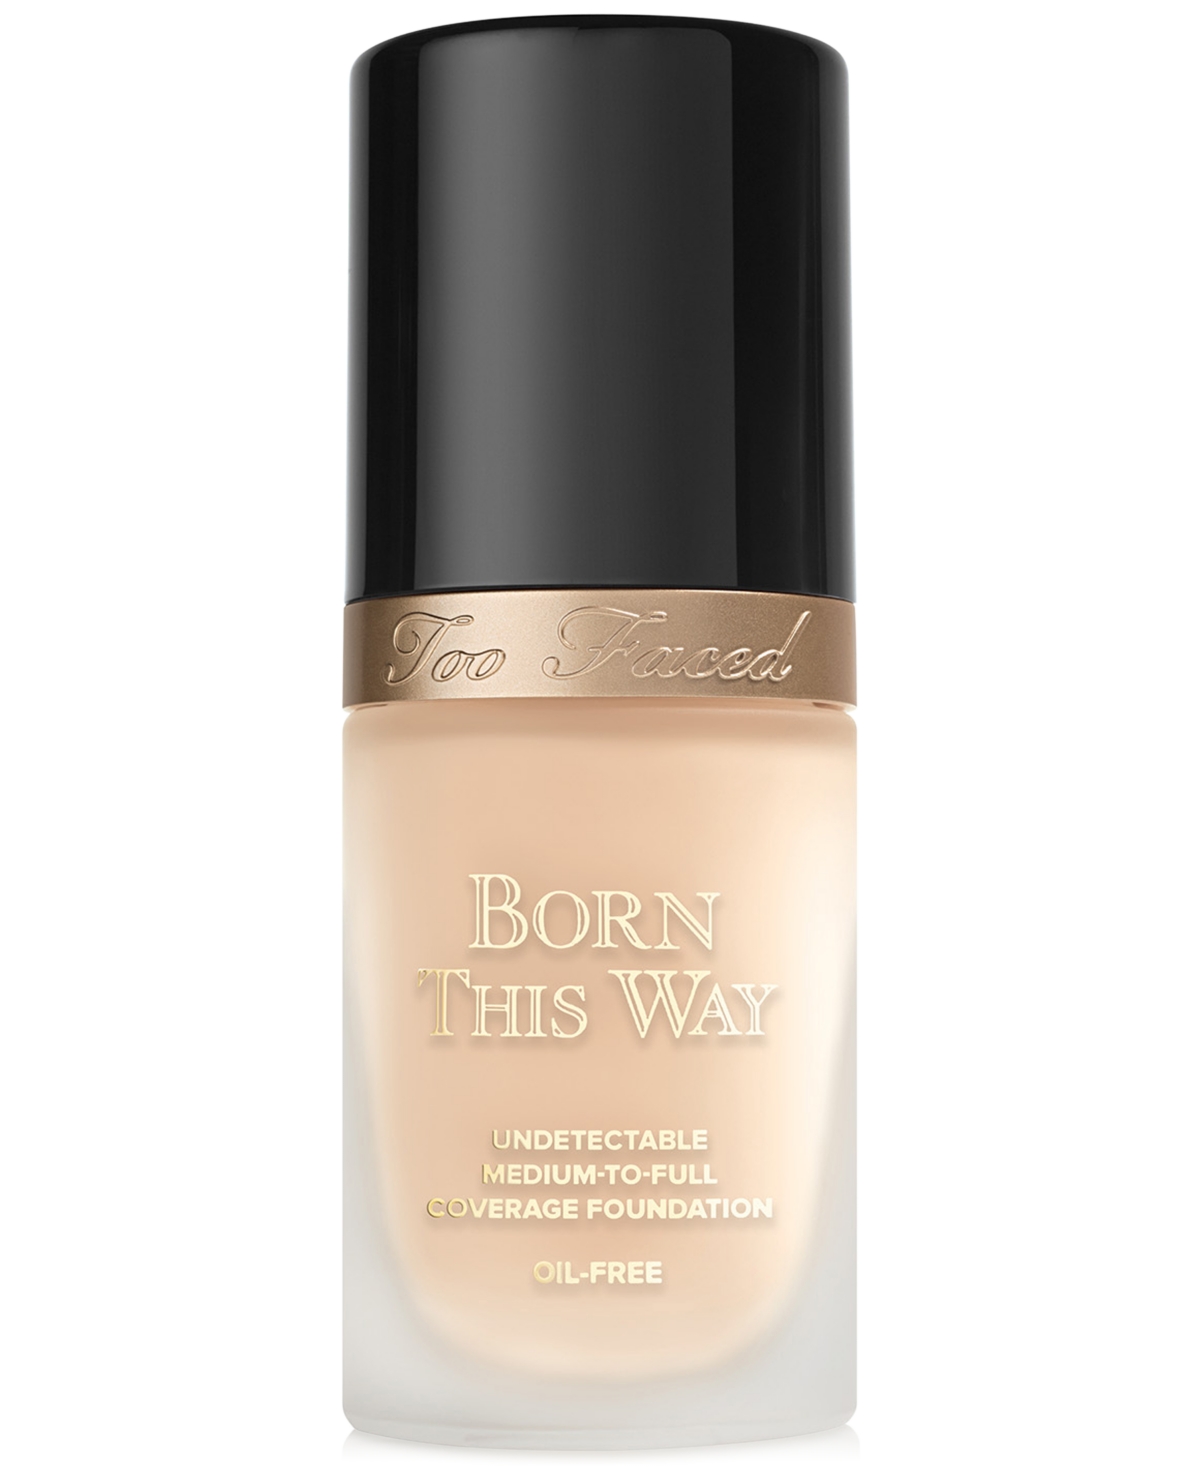 Too Faced Born This Way Flawless Coverage Natural Finish Foundation In Seashell - Very Fair W,rosy Undertones